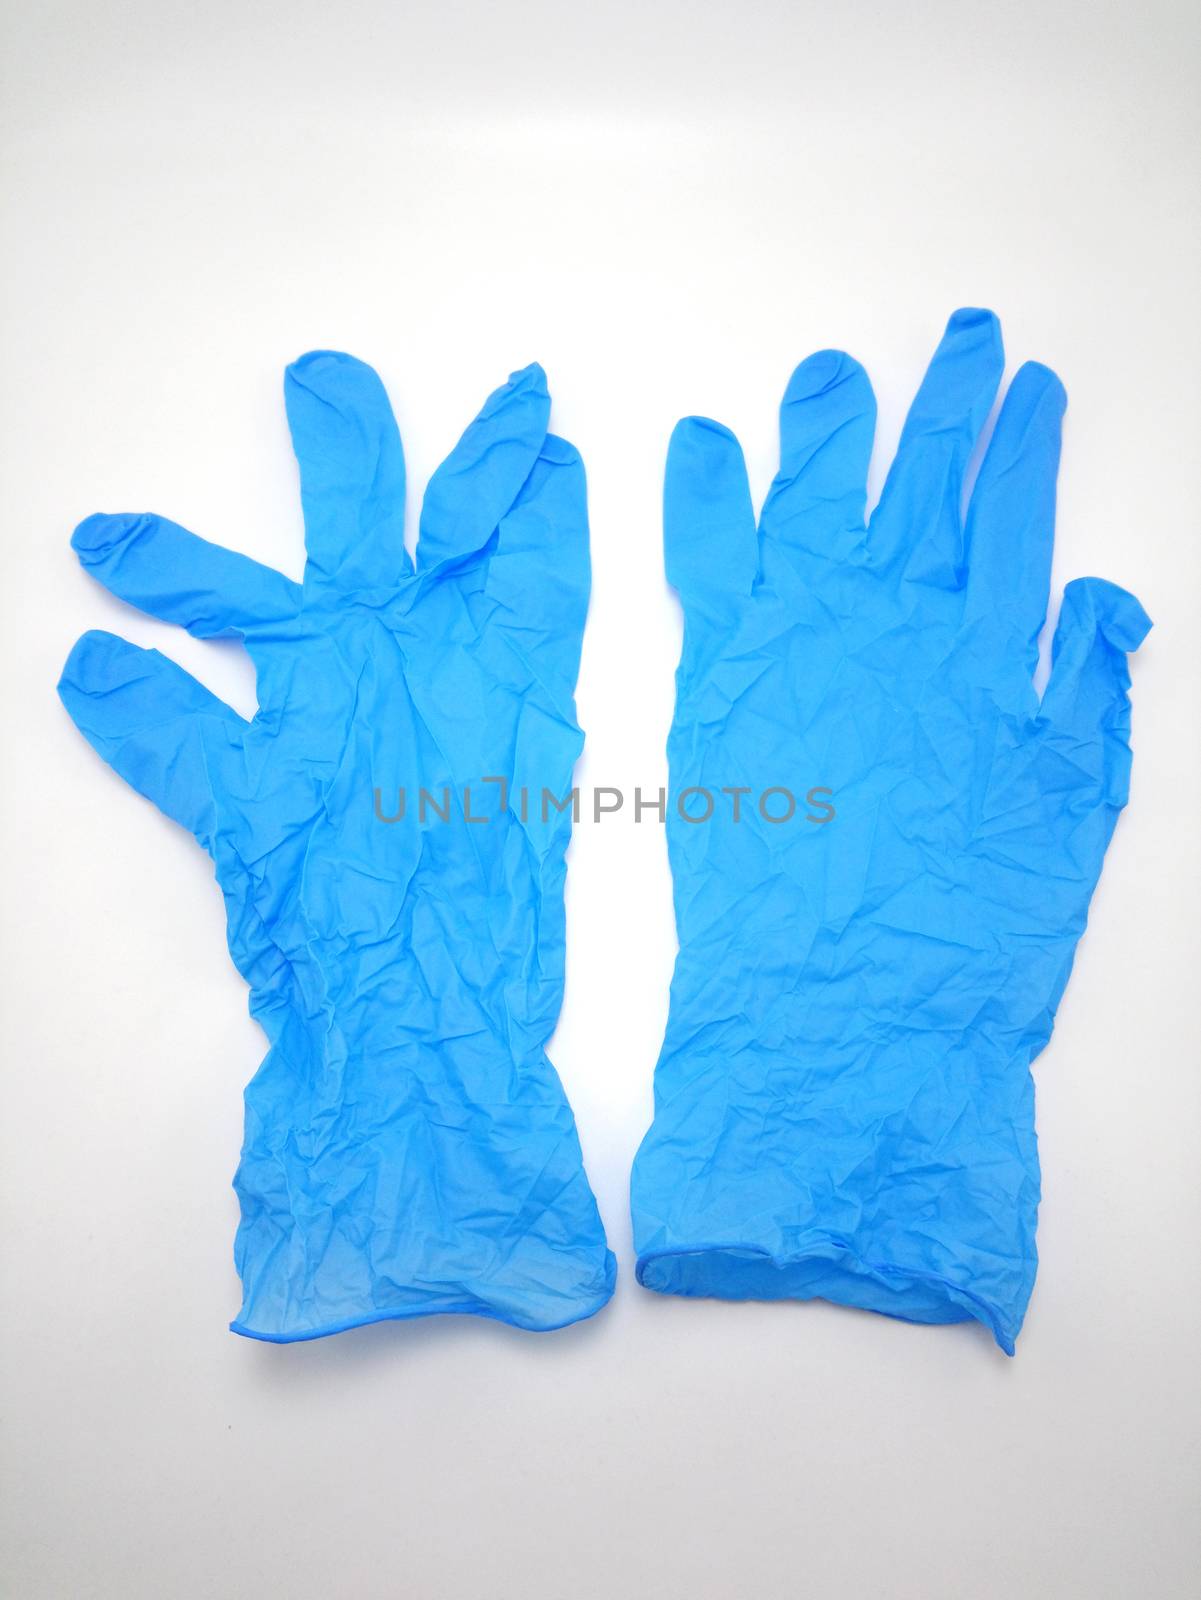 Blue pair rubber medical gloves use to put your hands